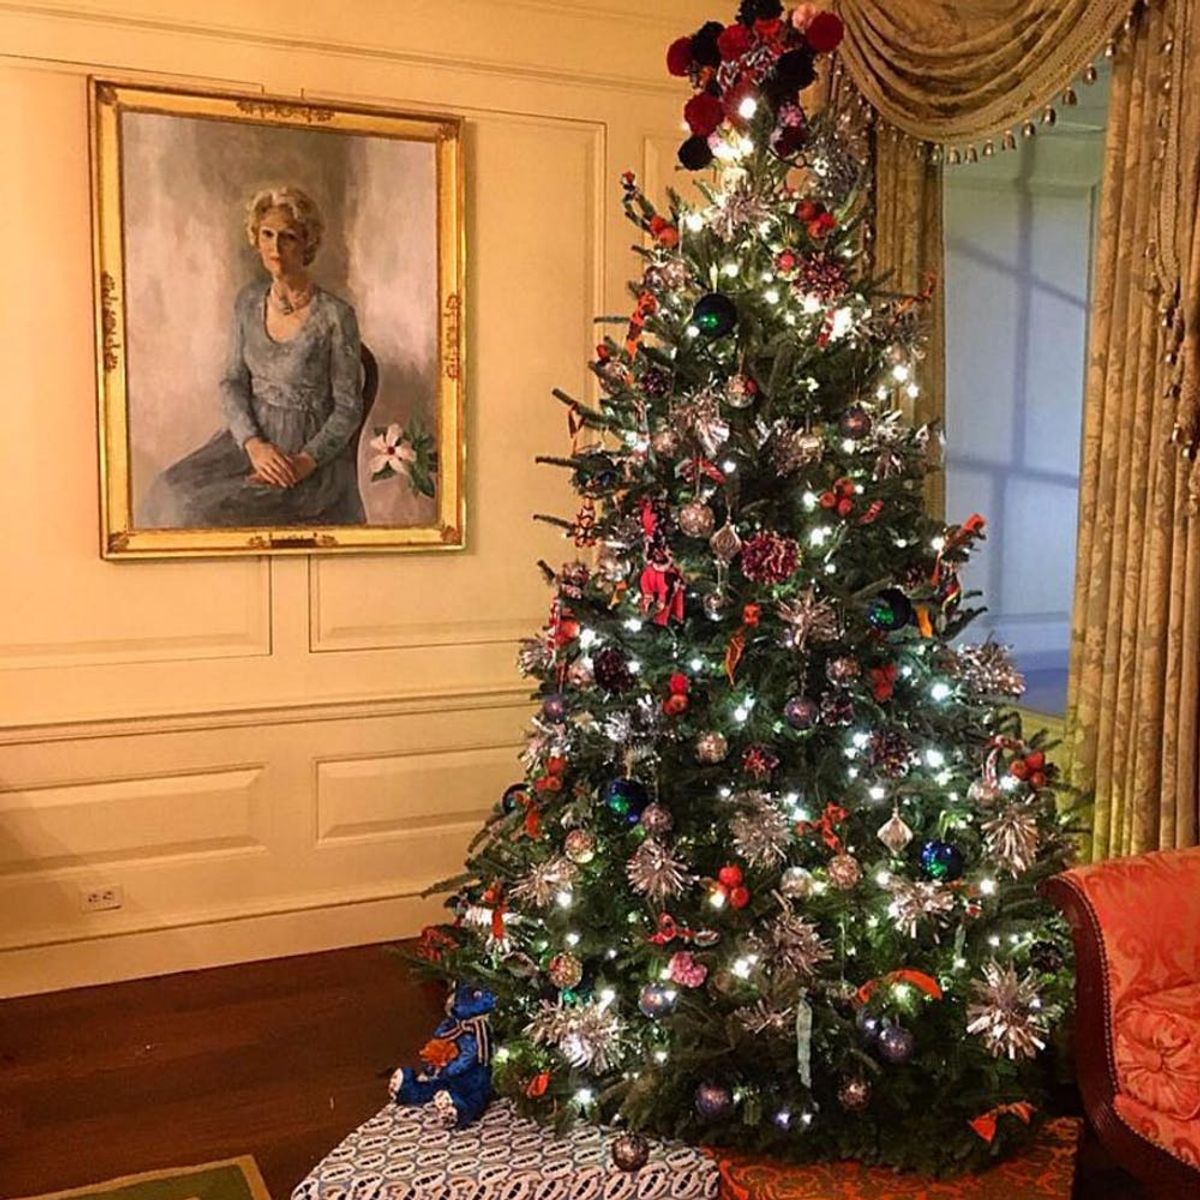 FLOTUS Recruited Some of Her Favorite Designers to Decorate the White House This Year